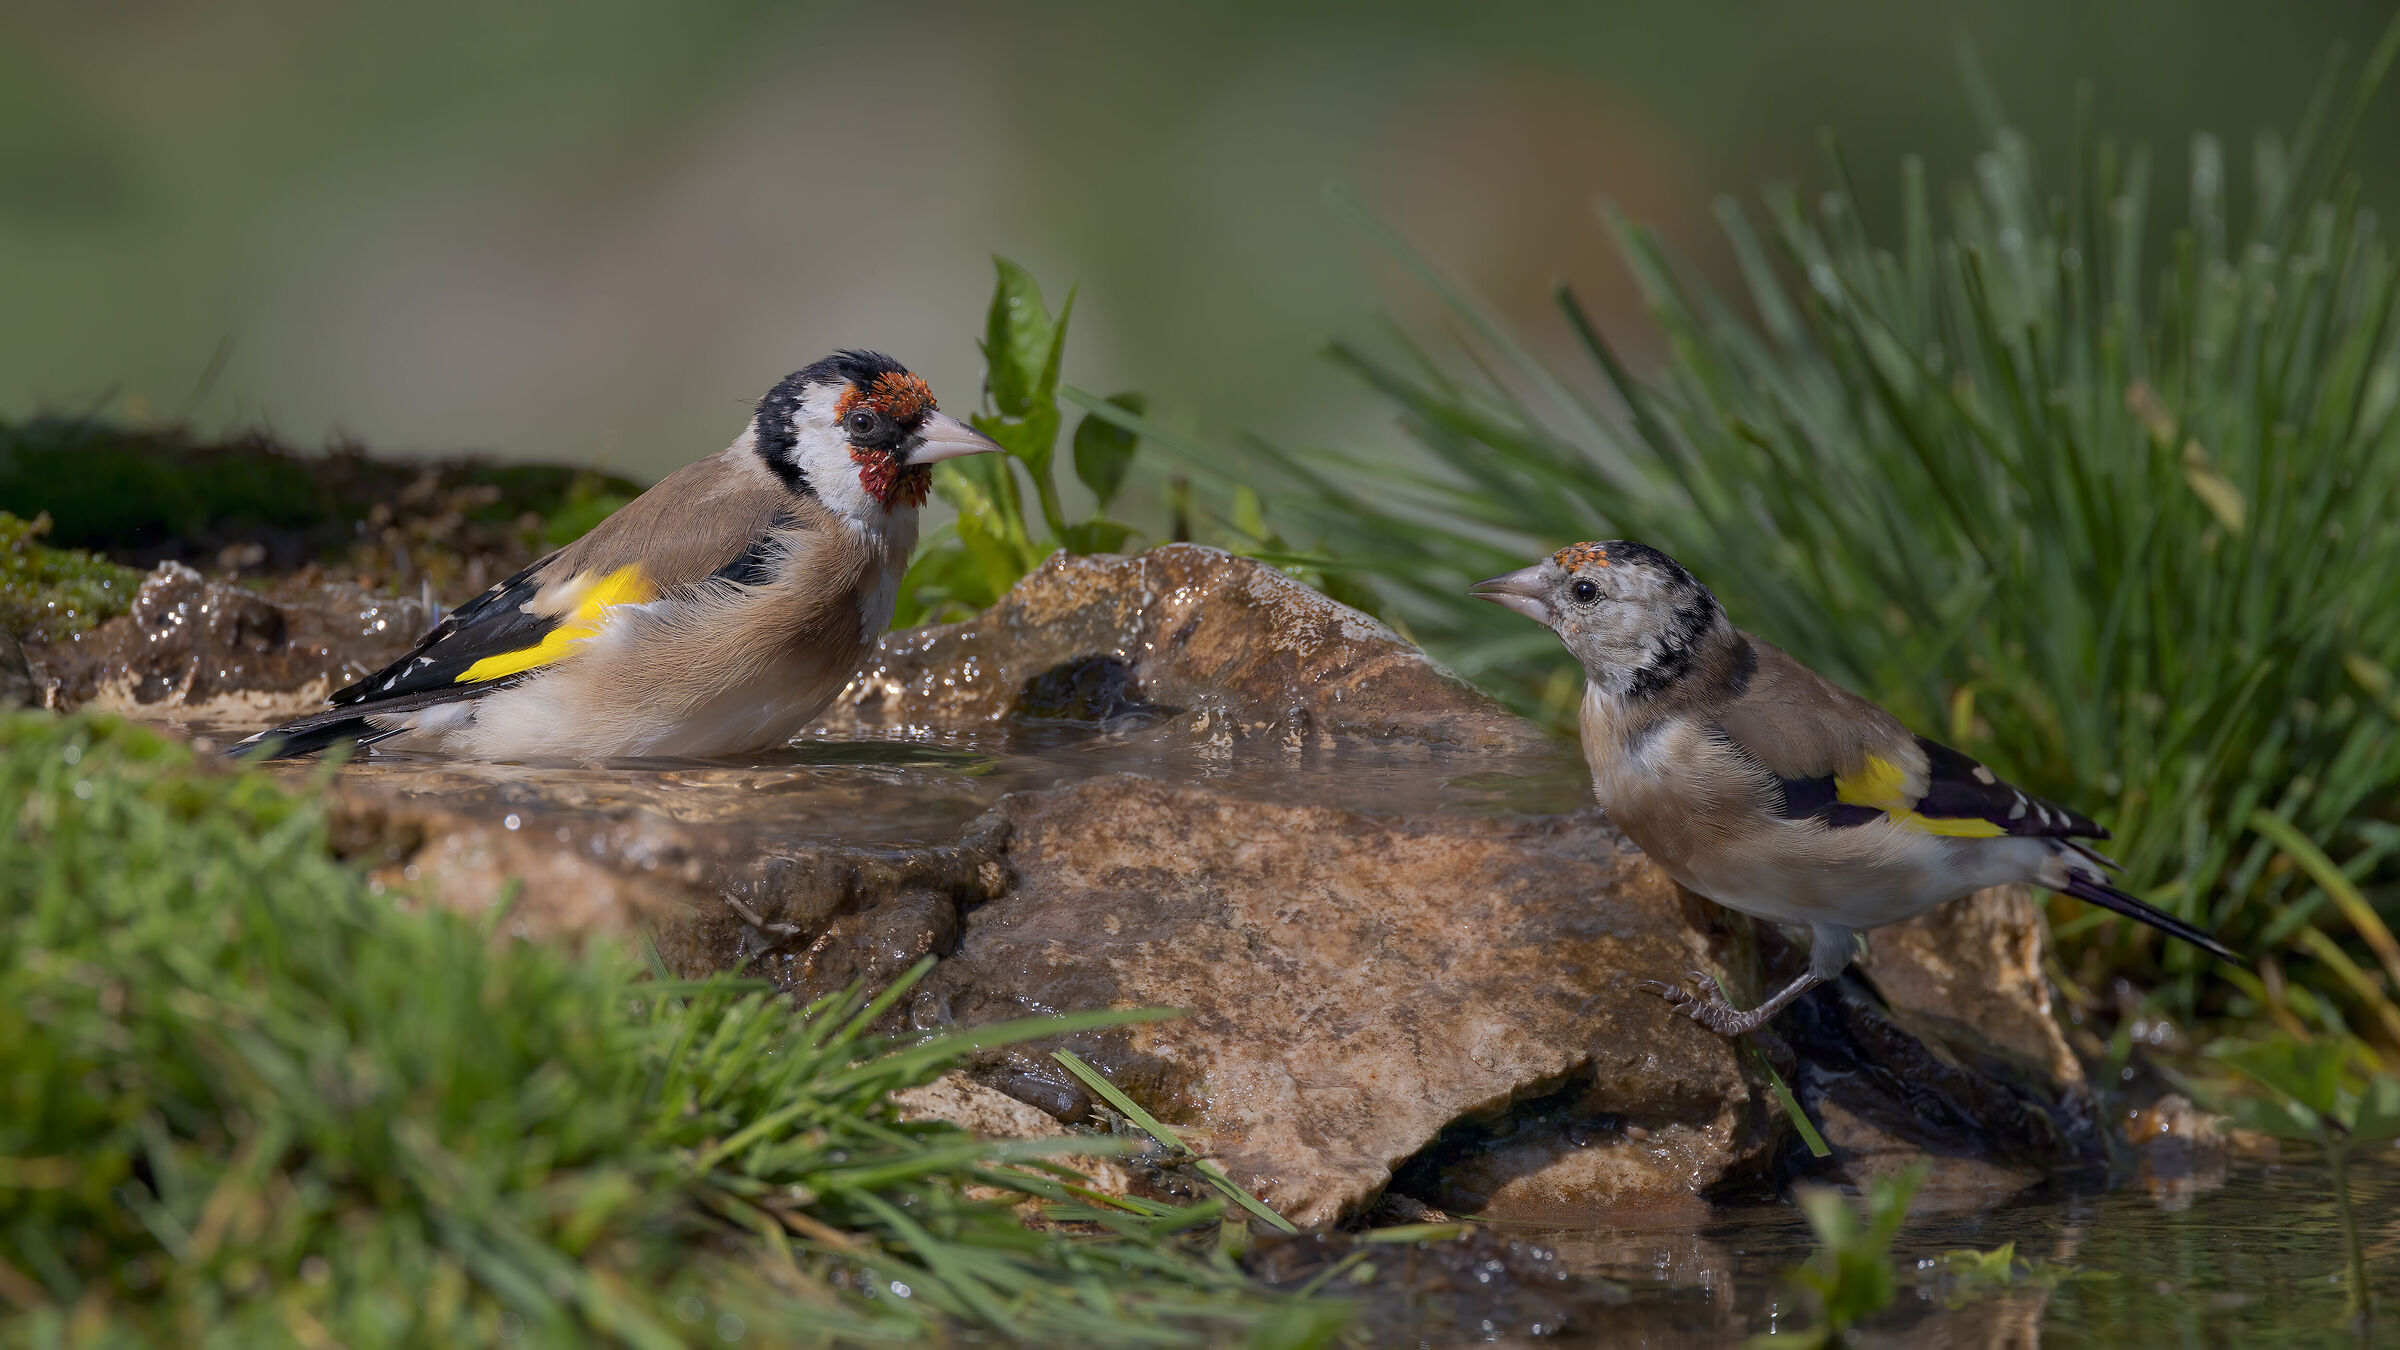 The young Goldfinch follows the adult to the puddle. ...